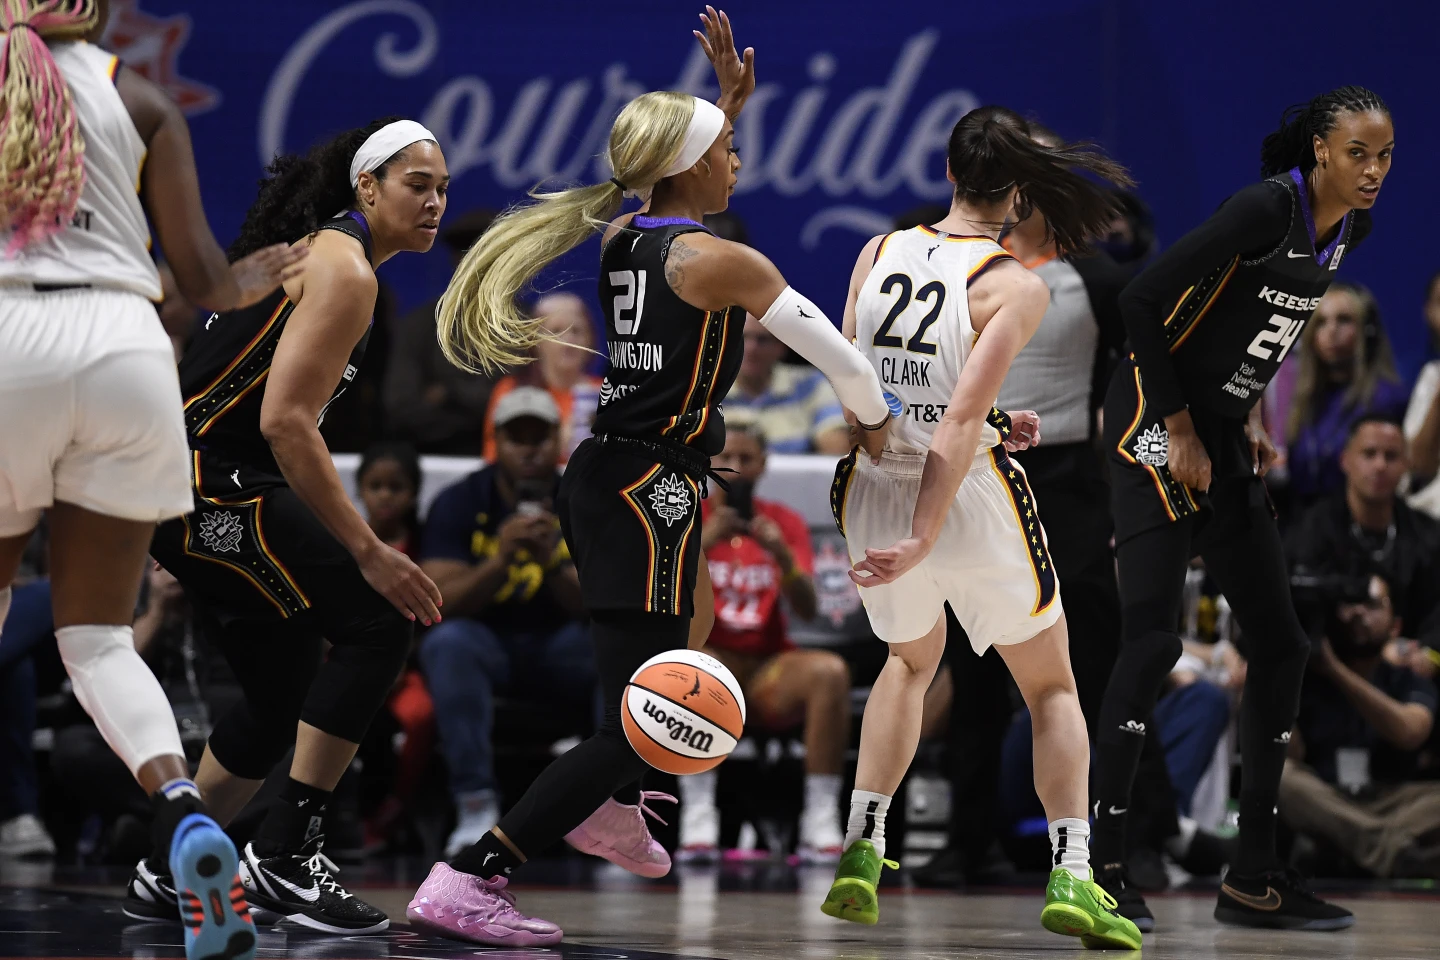 Caitlin Clark overcomes slow start in WNBA debut, but Indiana Fever struggle as team